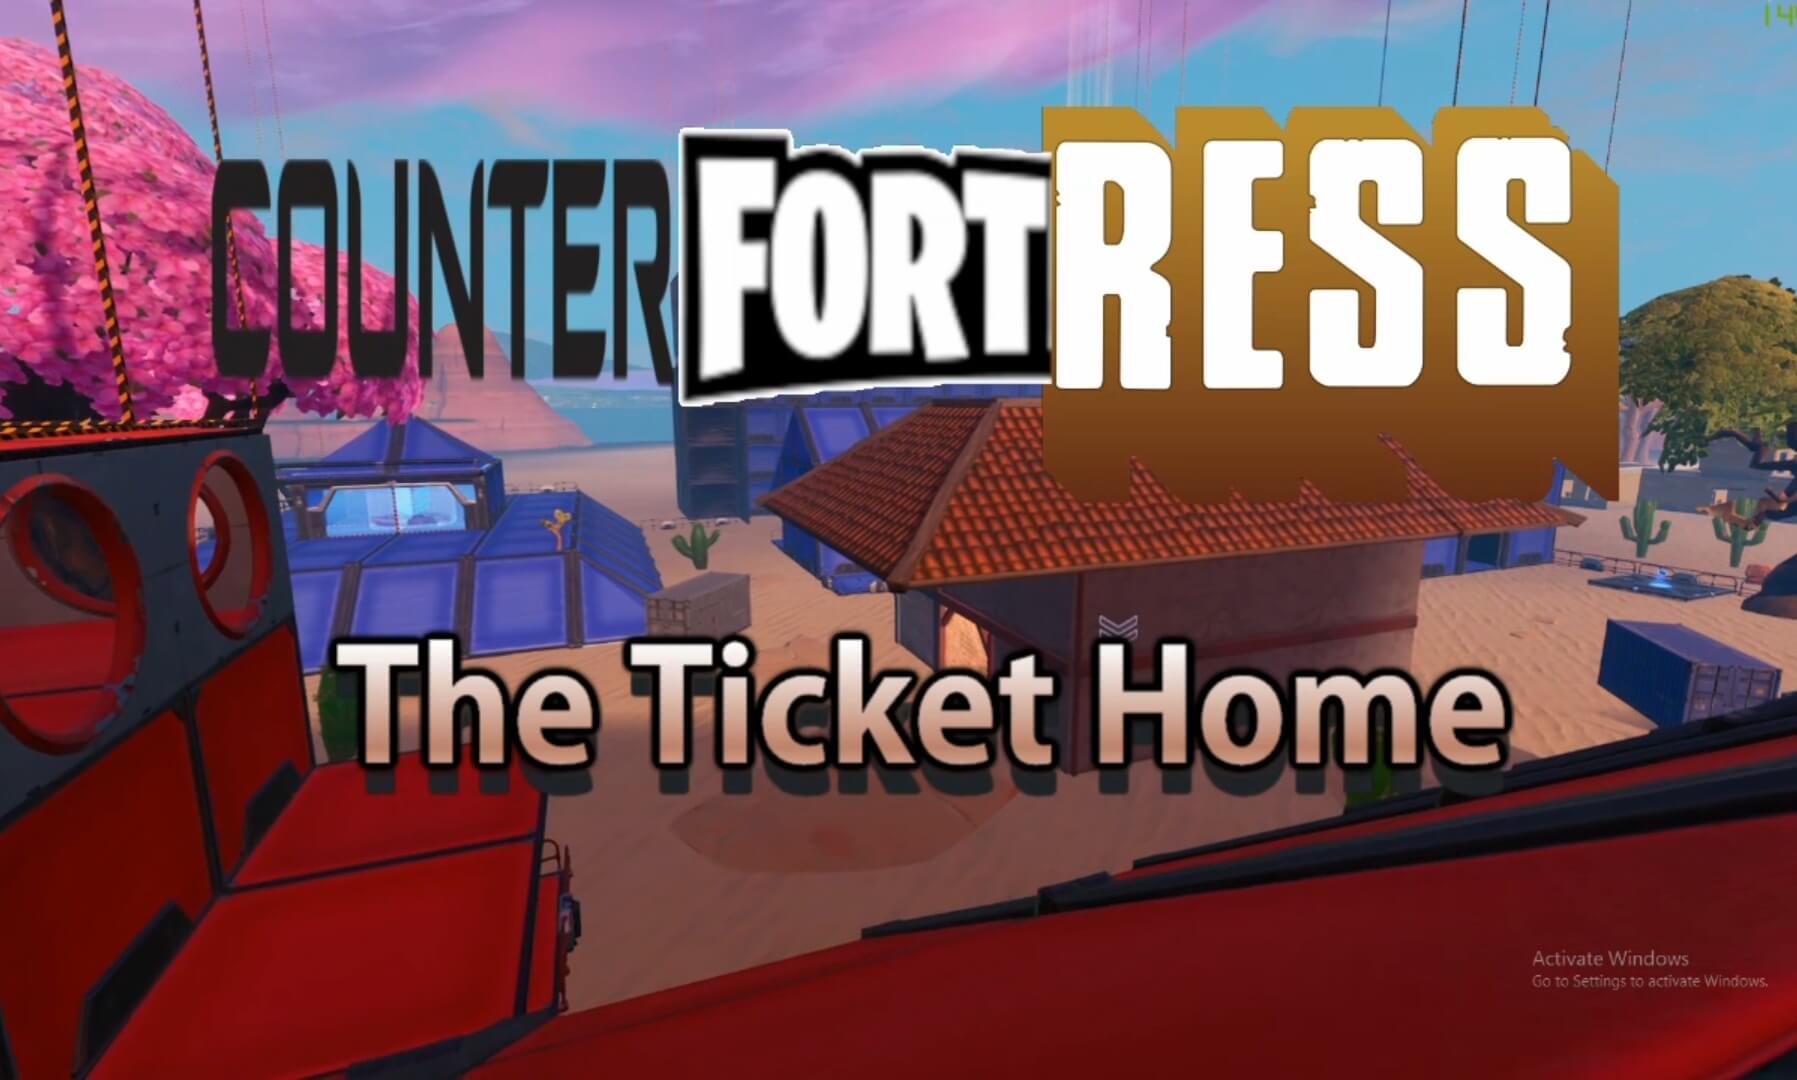 COUNTERFORTRESS THE TICKET HOME